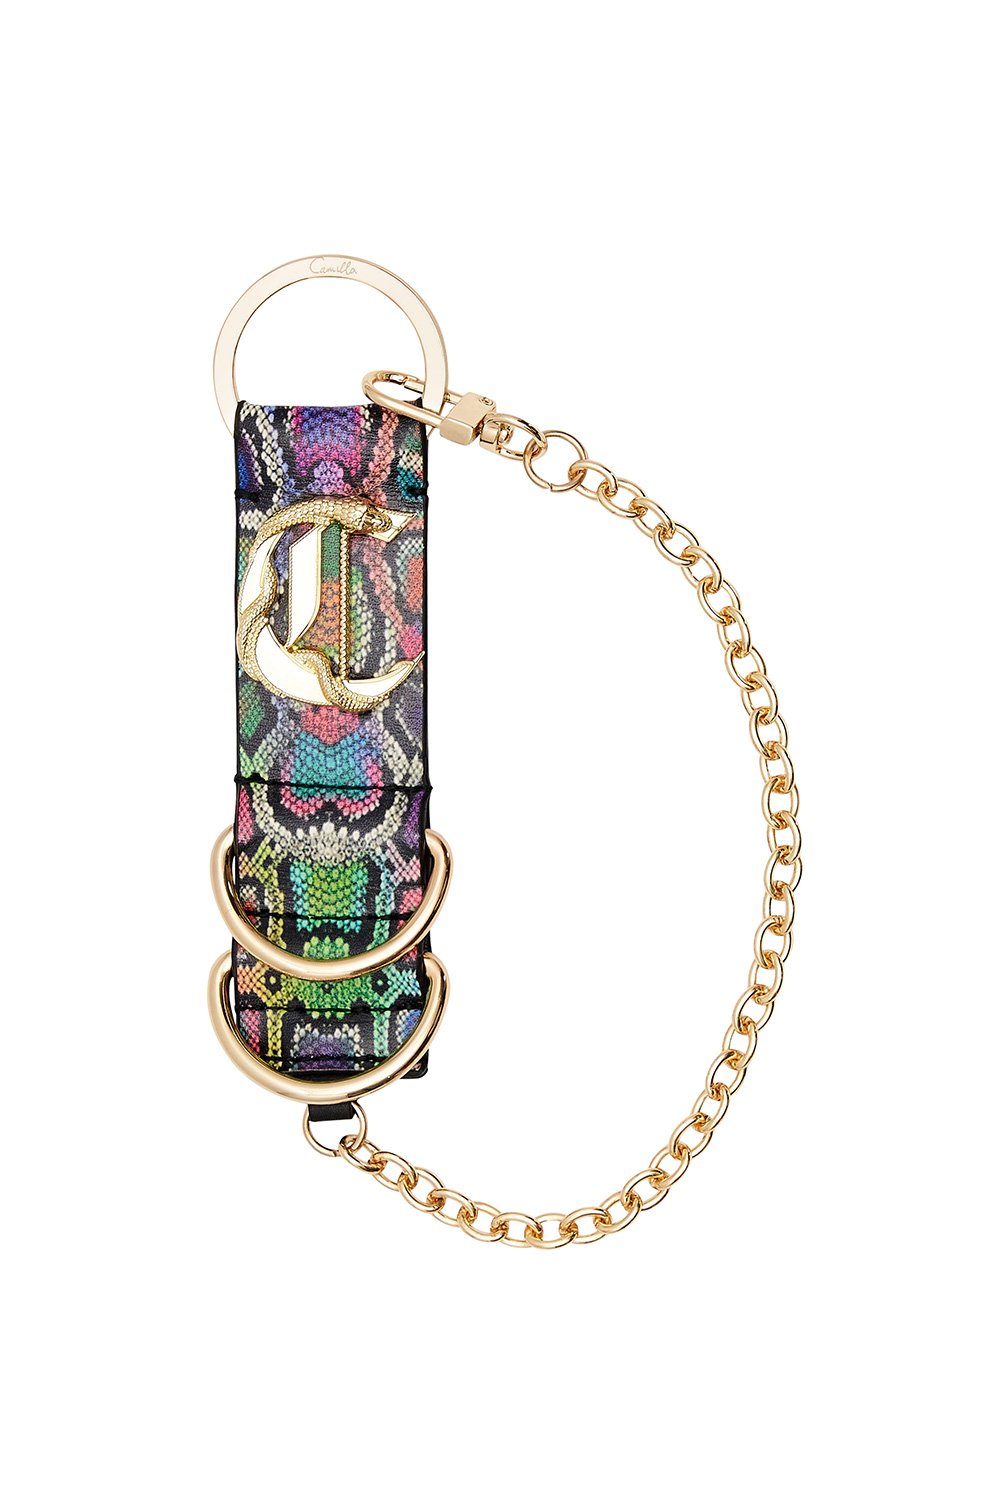 RAINBOW SNAKE KEYRING COMING DOWN FROM COSMOS